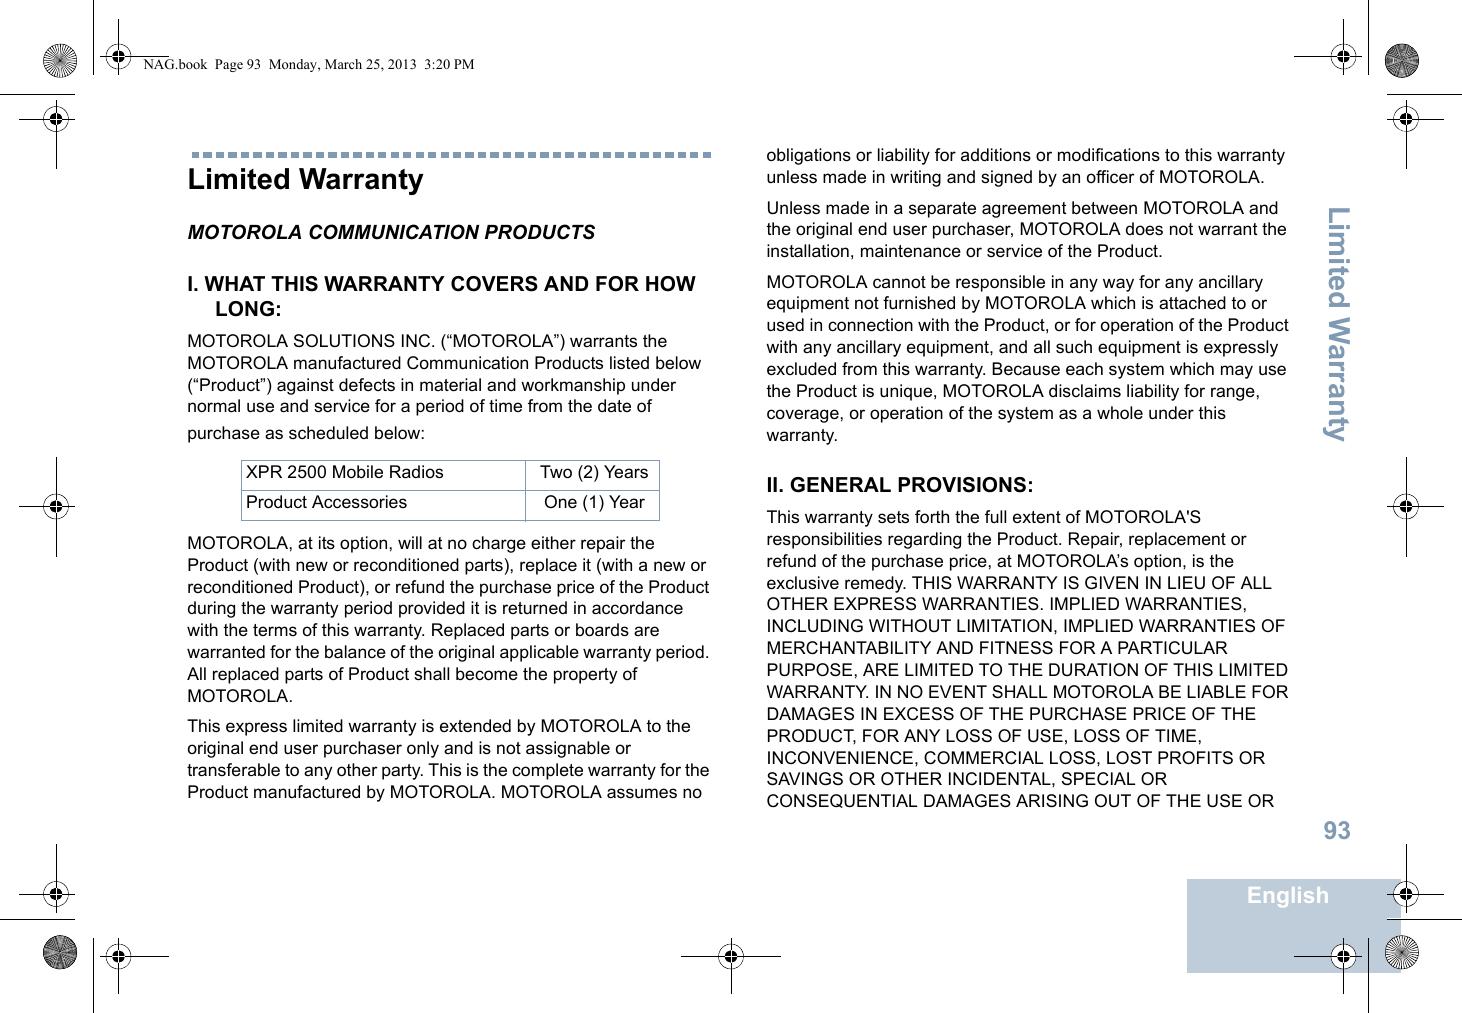 Limited WarrantyEnglish93Limited WarrantyMOTOROLA COMMUNICATION PRODUCTSI. WHAT THIS WARRANTY COVERS AND FOR HOW LONG:MOTOROLA SOLUTIONS INC. (“MOTOROLA”) warrants the MOTOROLA manufactured Communication Products listed below (“Product”) against defects in material and workmanship under normal use and service for a period of time from the date of purchase as scheduled below:MOTOROLA, at its option, will at no charge either repair the Product (with new or reconditioned parts), replace it (with a new or reconditioned Product), or refund the purchase price of the Product during the warranty period provided it is returned in accordance with the terms of this warranty. Replaced parts or boards are warranted for the balance of the original applicable warranty period. All replaced parts of Product shall become the property of MOTOROLA.This express limited warranty is extended by MOTOROLA to the original end user purchaser only and is not assignable or transferable to any other party. This is the complete warranty for the Product manufactured by MOTOROLA. MOTOROLA assumes no obligations or liability for additions or modifications to this warranty unless made in writing and signed by an officer of MOTOROLA. Unless made in a separate agreement between MOTOROLA and the original end user purchaser, MOTOROLA does not warrant the installation, maintenance or service of the Product.MOTOROLA cannot be responsible in any way for any ancillary equipment not furnished by MOTOROLA which is attached to or used in connection with the Product, or for operation of the Product with any ancillary equipment, and all such equipment is expressly excluded from this warranty. Because each system which may use the Product is unique, MOTOROLA disclaims liability for range, coverage, or operation of the system as a whole under this warranty.II. GENERAL PROVISIONS:This warranty sets forth the full extent of MOTOROLA&apos;S responsibilities regarding the Product. Repair, replacement or refund of the purchase price, at MOTOROLA’s option, is the exclusive remedy. THIS WARRANTY IS GIVEN IN LIEU OF ALL OTHER EXPRESS WARRANTIES. IMPLIED WARRANTIES, INCLUDING WITHOUT LIMITATION, IMPLIED WARRANTIES OF MERCHANTABILITY AND FITNESS FOR A PARTICULAR PURPOSE, ARE LIMITED TO THE DURATION OF THIS LIMITED WARRANTY. IN NO EVENT SHALL MOTOROLA BE LIABLE FOR DAMAGES IN EXCESS OF THE PURCHASE PRICE OF THE PRODUCT, FOR ANY LOSS OF USE, LOSS OF TIME, INCONVENIENCE, COMMERCIAL LOSS, LOST PROFITS OR SAVINGS OR OTHER INCIDENTAL, SPECIAL OR CONSEQUENTIAL DAMAGES ARISING OUT OF THE USE OR XPR 2500 Mobile Radios Two (2) YearsProduct Accessories One (1) YearNAG.book  Page 93  Monday, March 25, 2013  3:20 PM